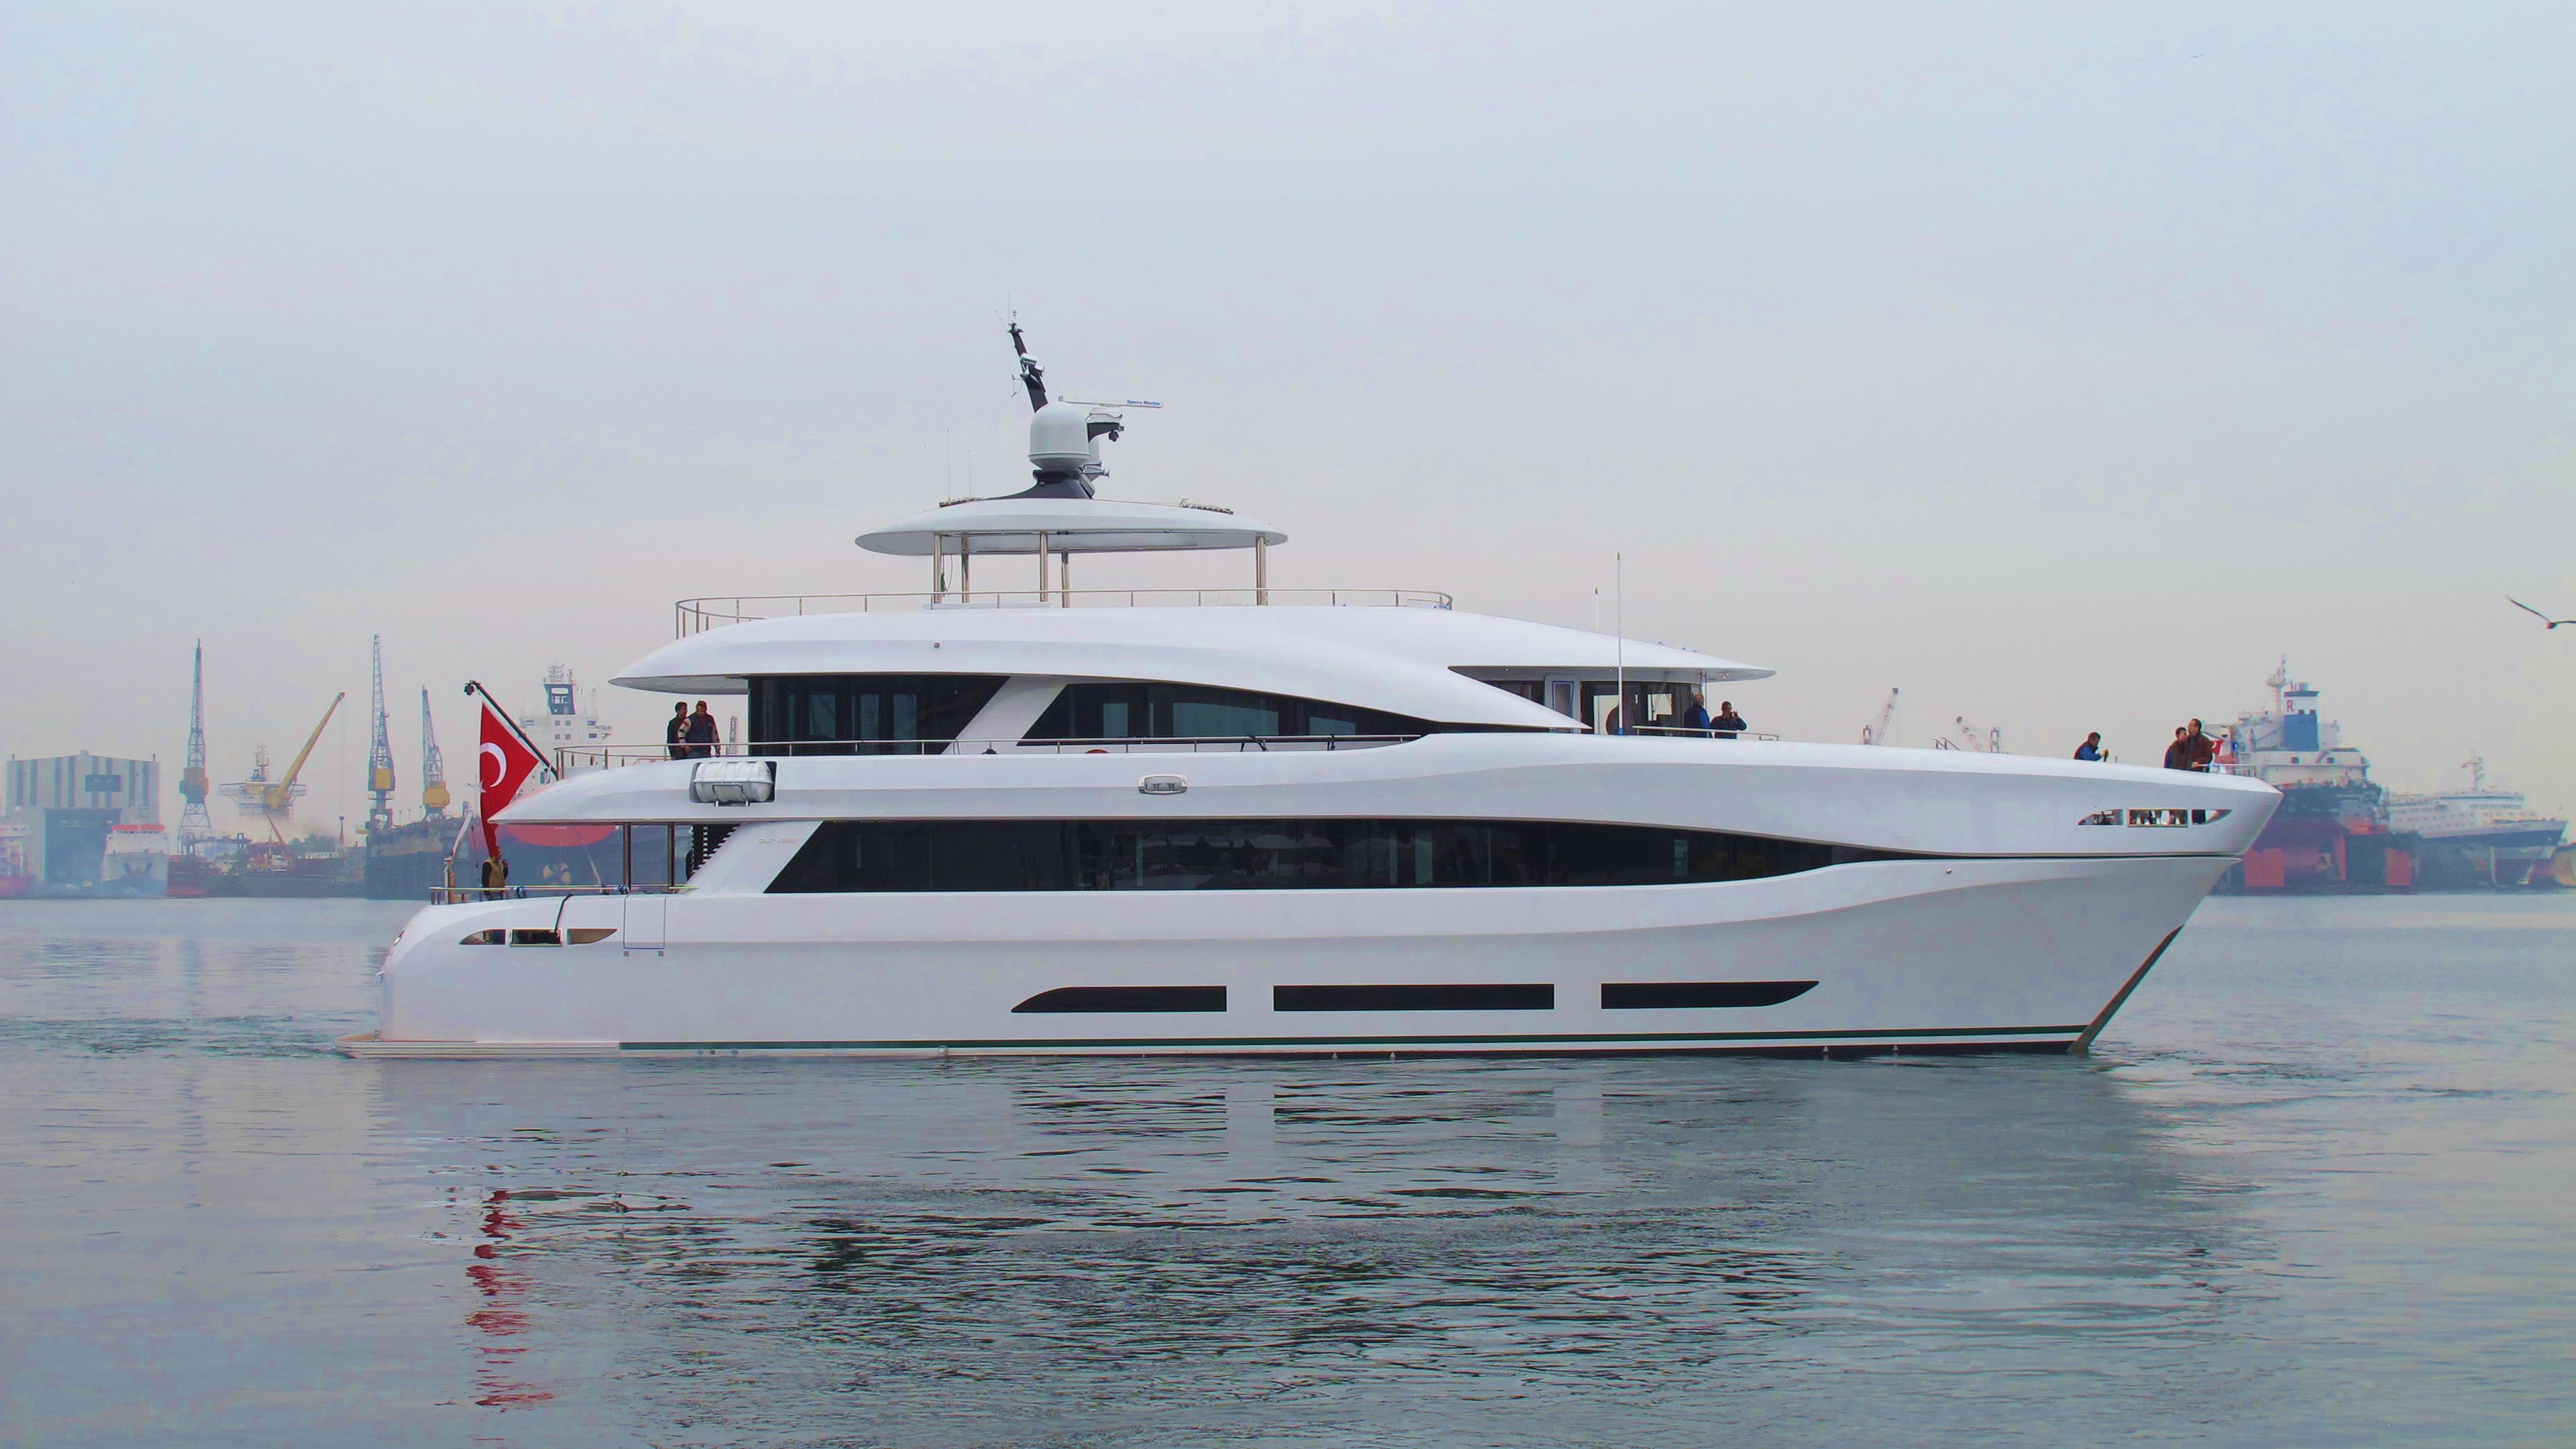 33m Curvelle Yacht Quaranta launched by Logos Marine